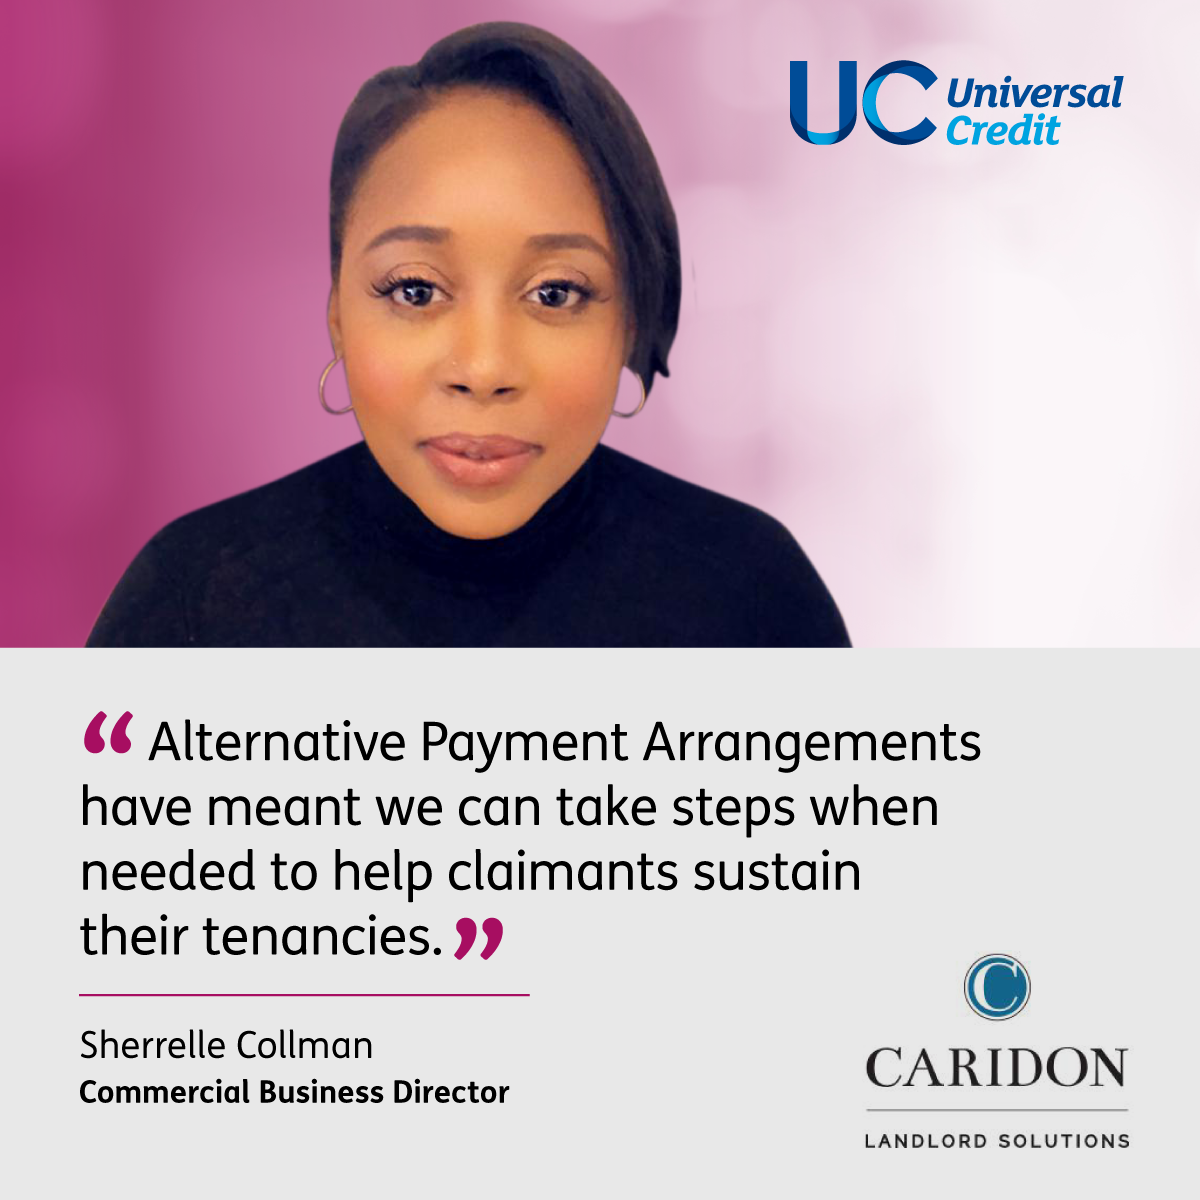 Photo of Sherrelle Collman of Caridon Landlord Solutions. Quote "Alternative Payment Arrangements have meant we can take steps when needed to help claimants sustain their tenancies."